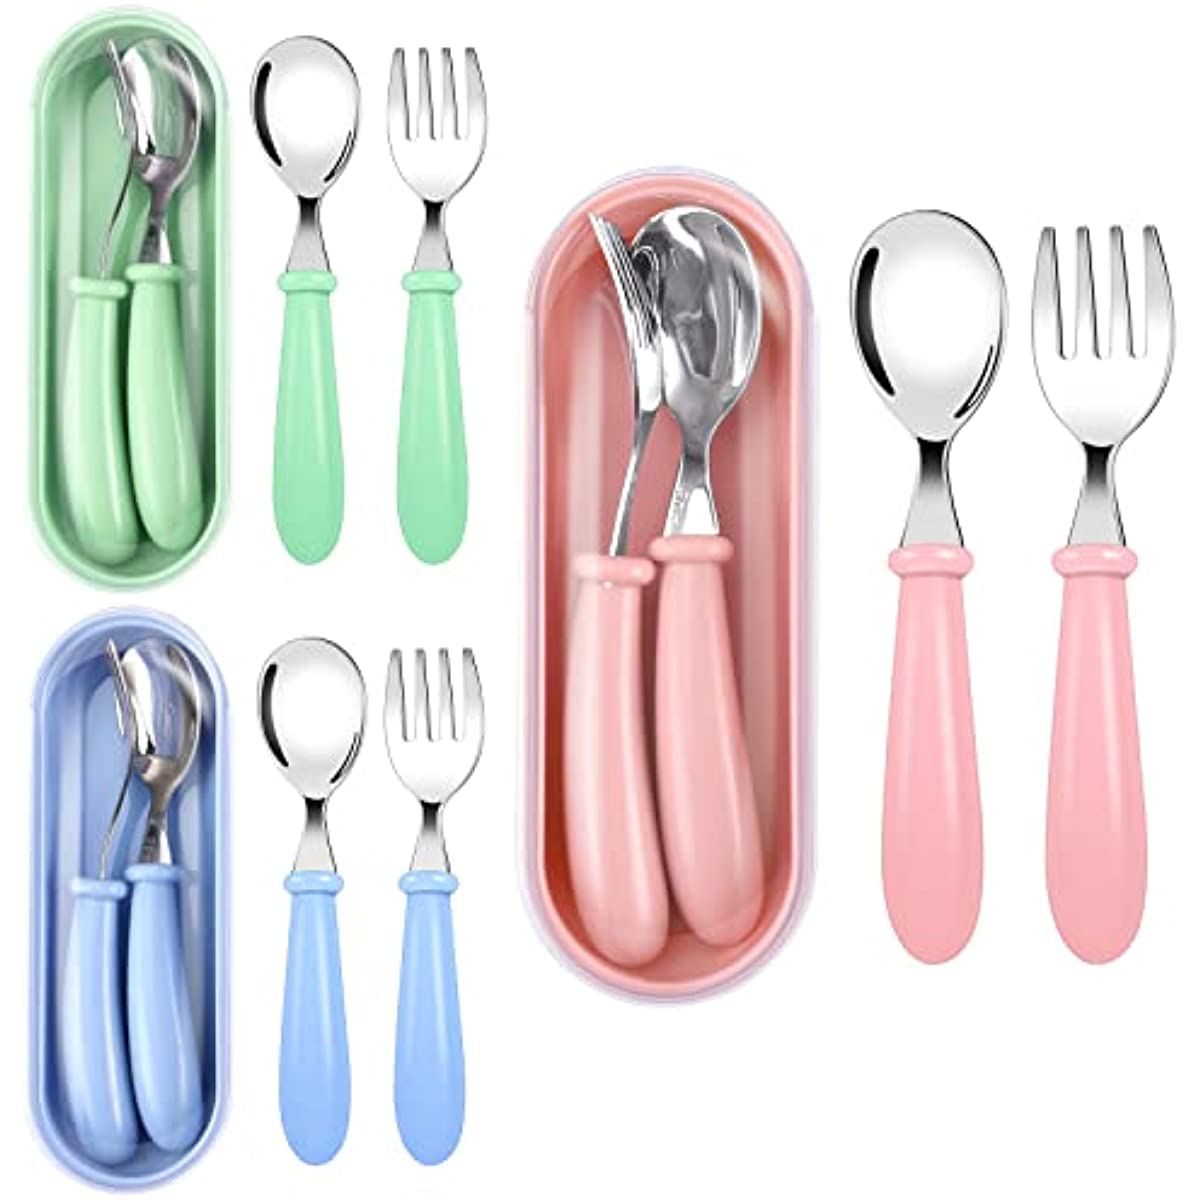 Cute Cartoon Travel Tableware with Case Portable Utensils Cutlery Set  Reusable Flatware Silverware Include Fork Spoon with Case - AliExpress